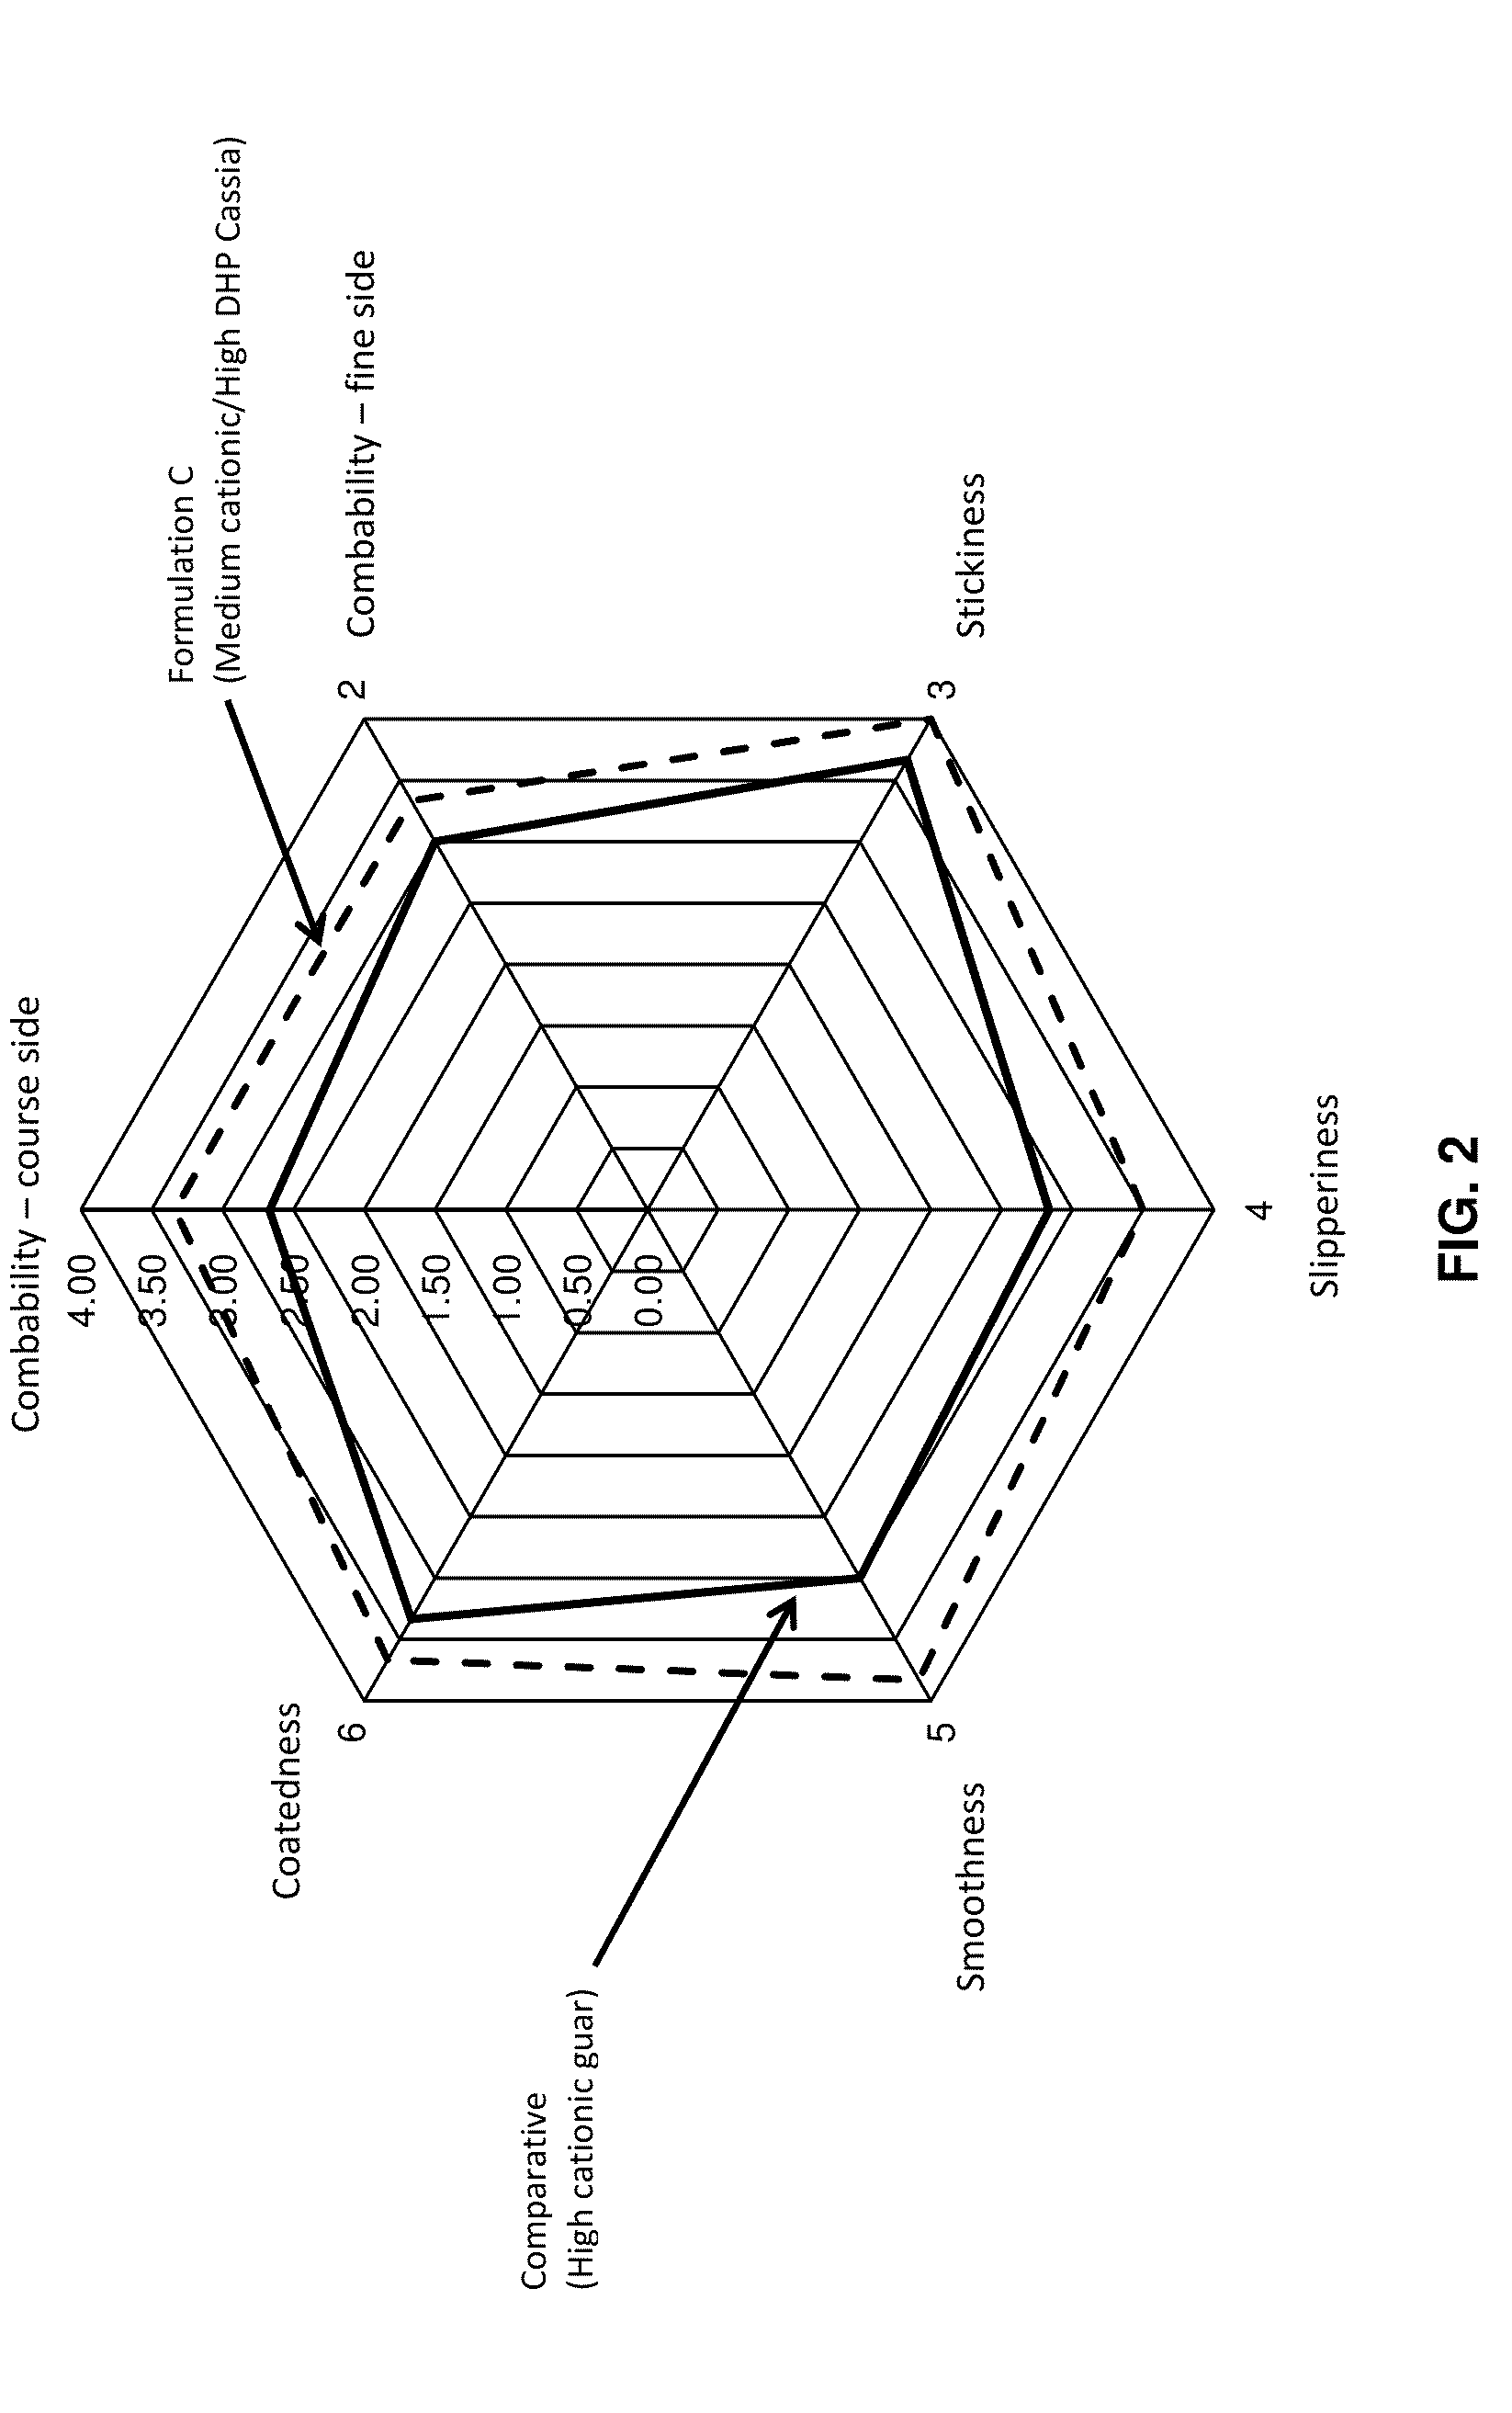 Dihydroxyalkyl substituted polygalactomannan, and methods for producing and using the same